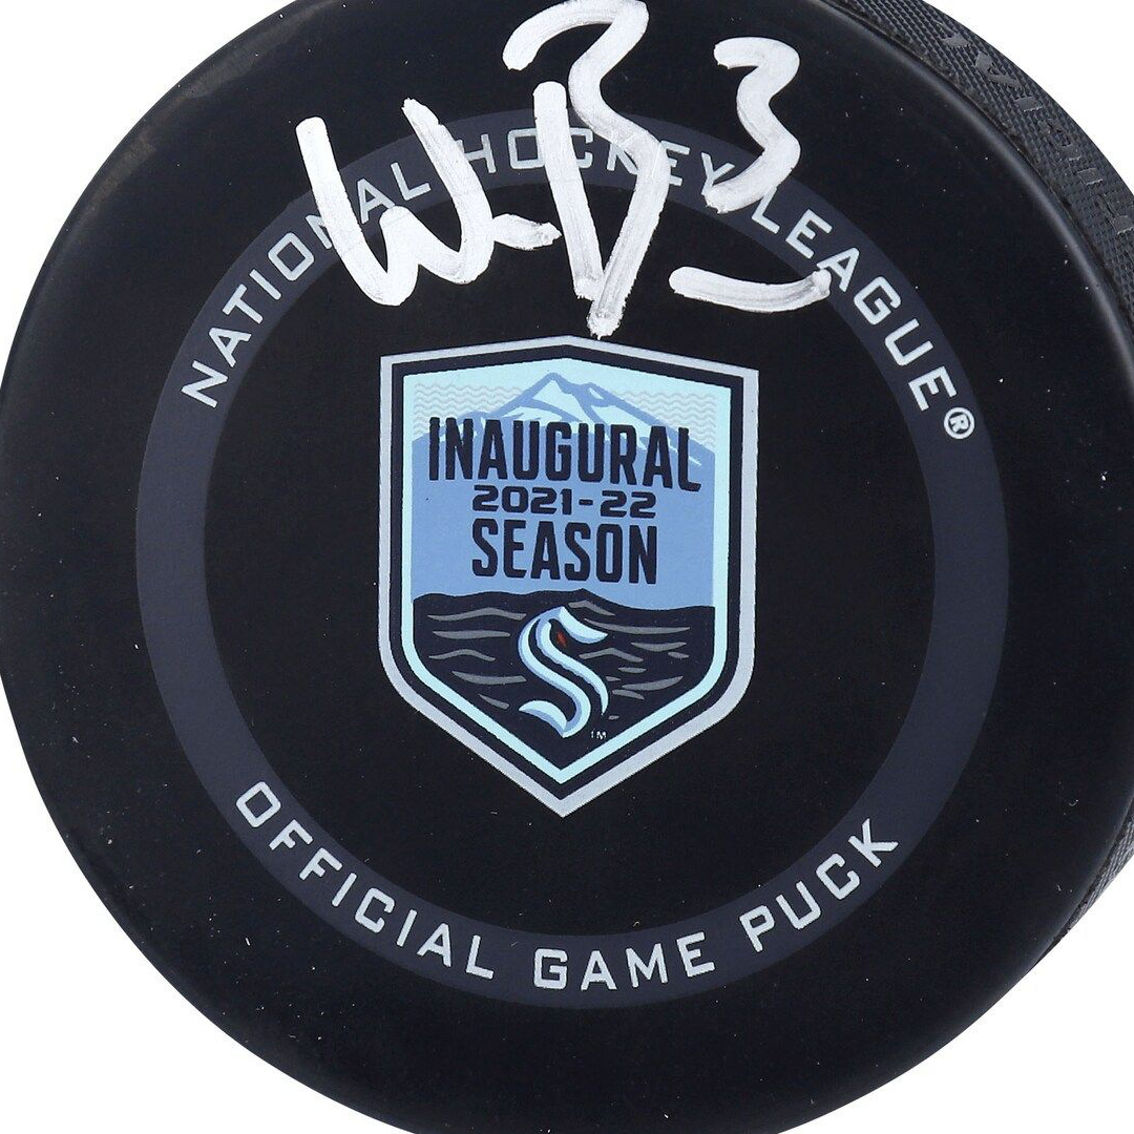 Fanatics Authentic Will Borgen Seattle Kraken Autographed 2021-22 Inaugural Season Official Game Puck - Image 2 of 3